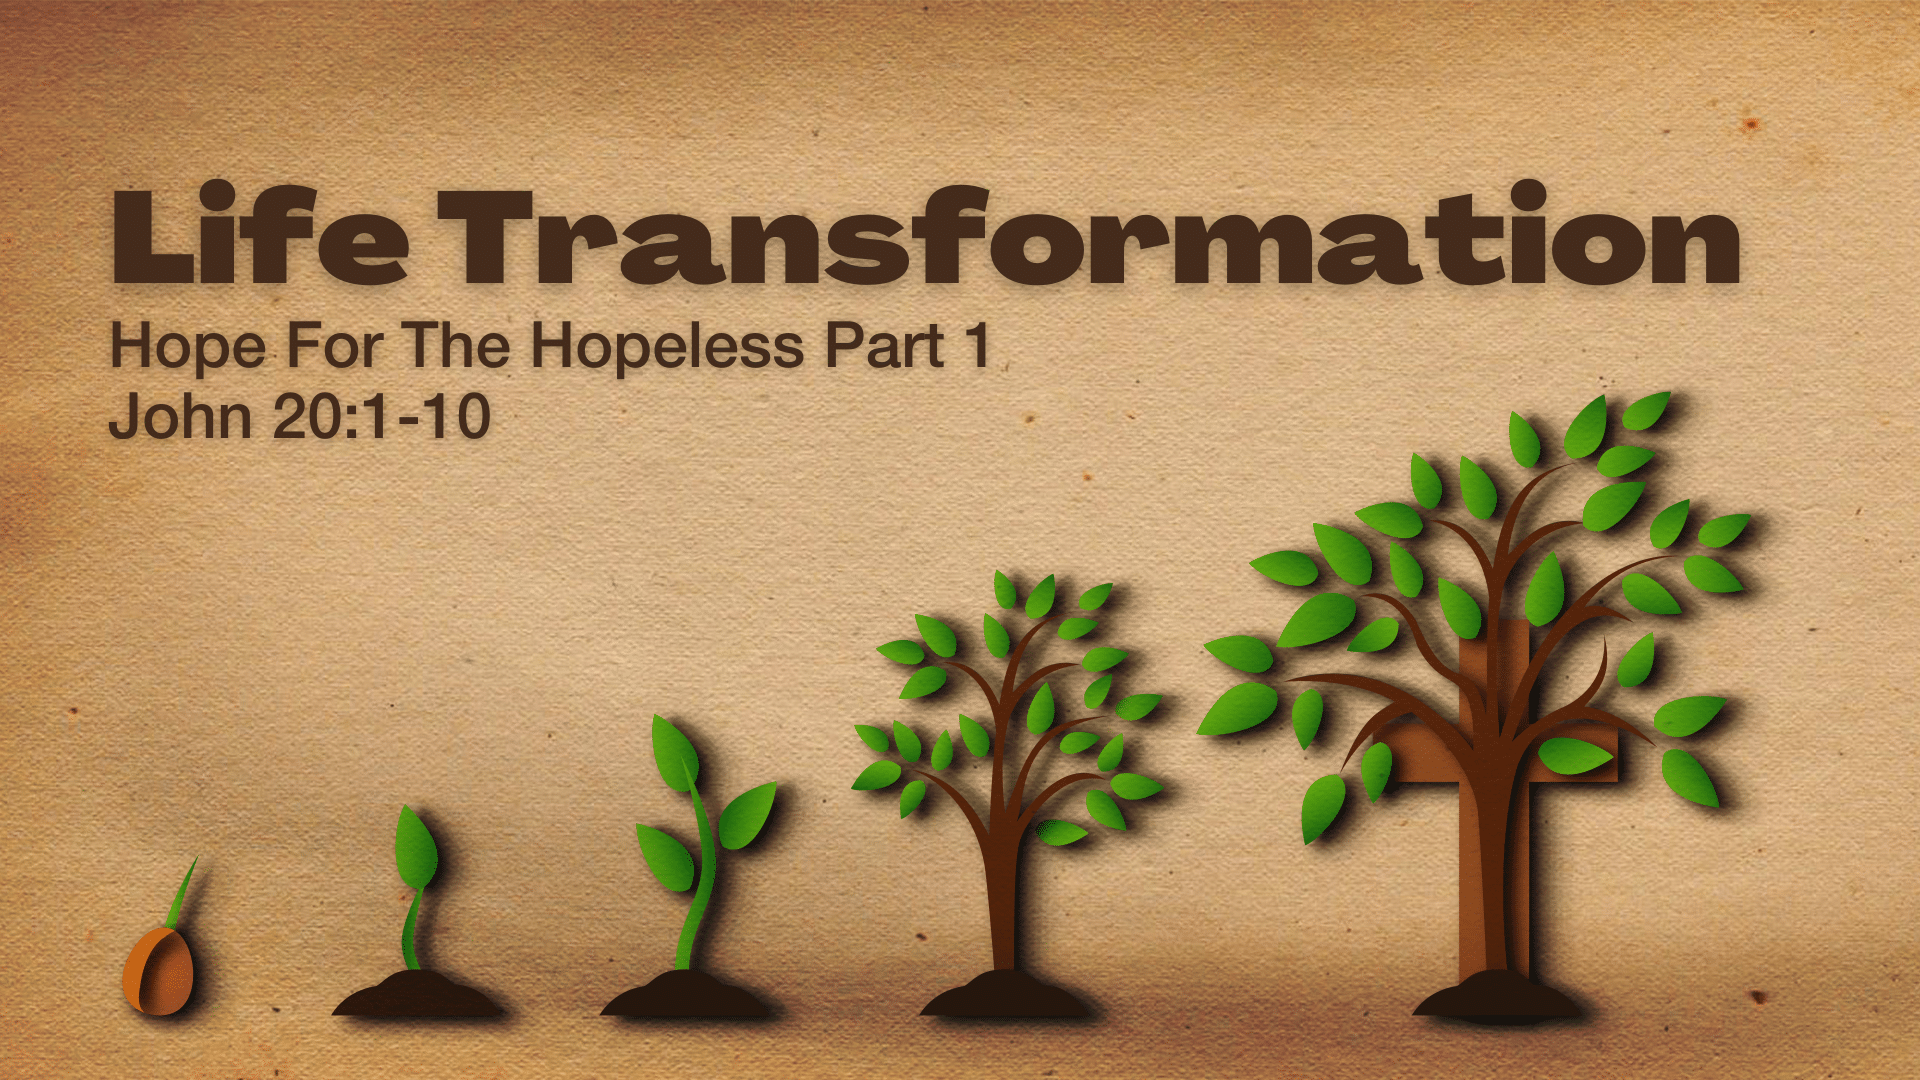 Life Transformation: Hope For The Hopeless Part 1